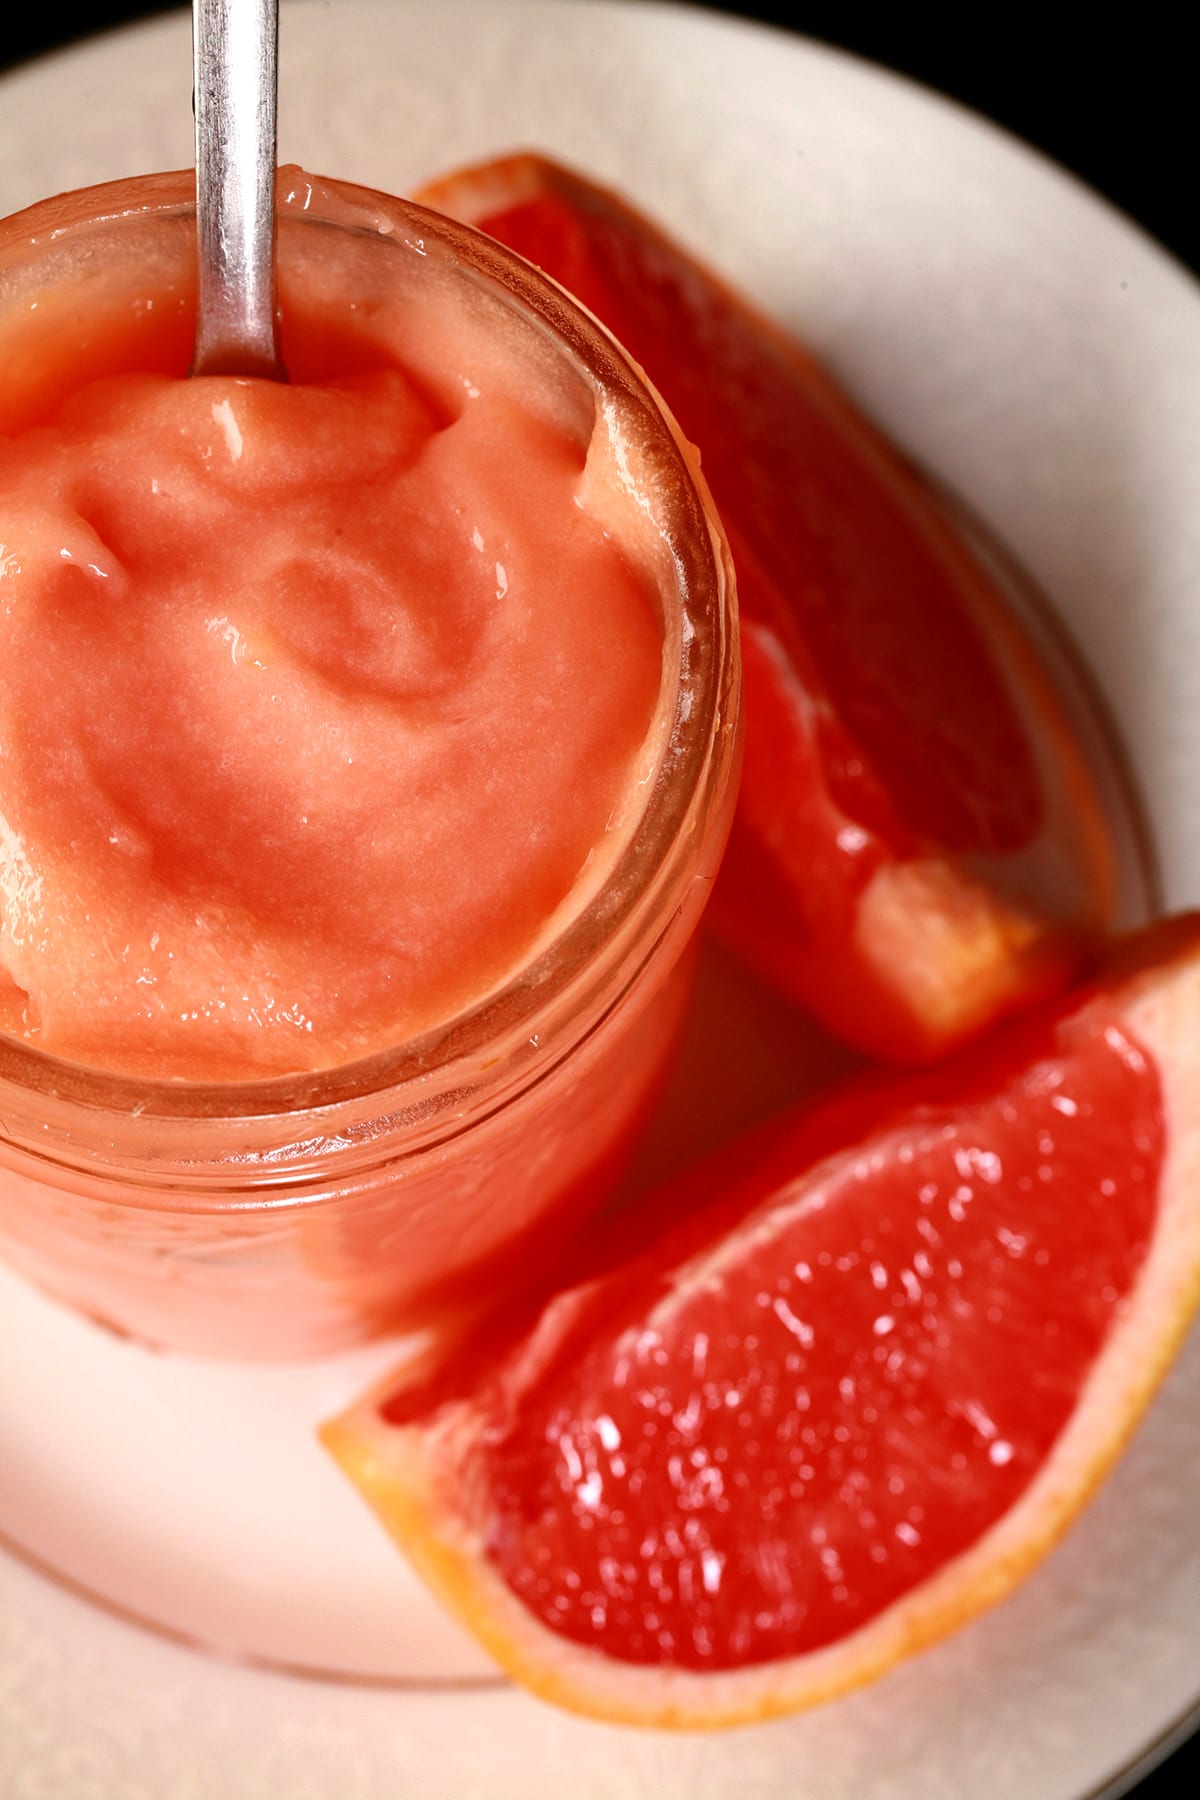 A jar of pink grapefruit curd on a plate, next to slices of pink grapefruit.